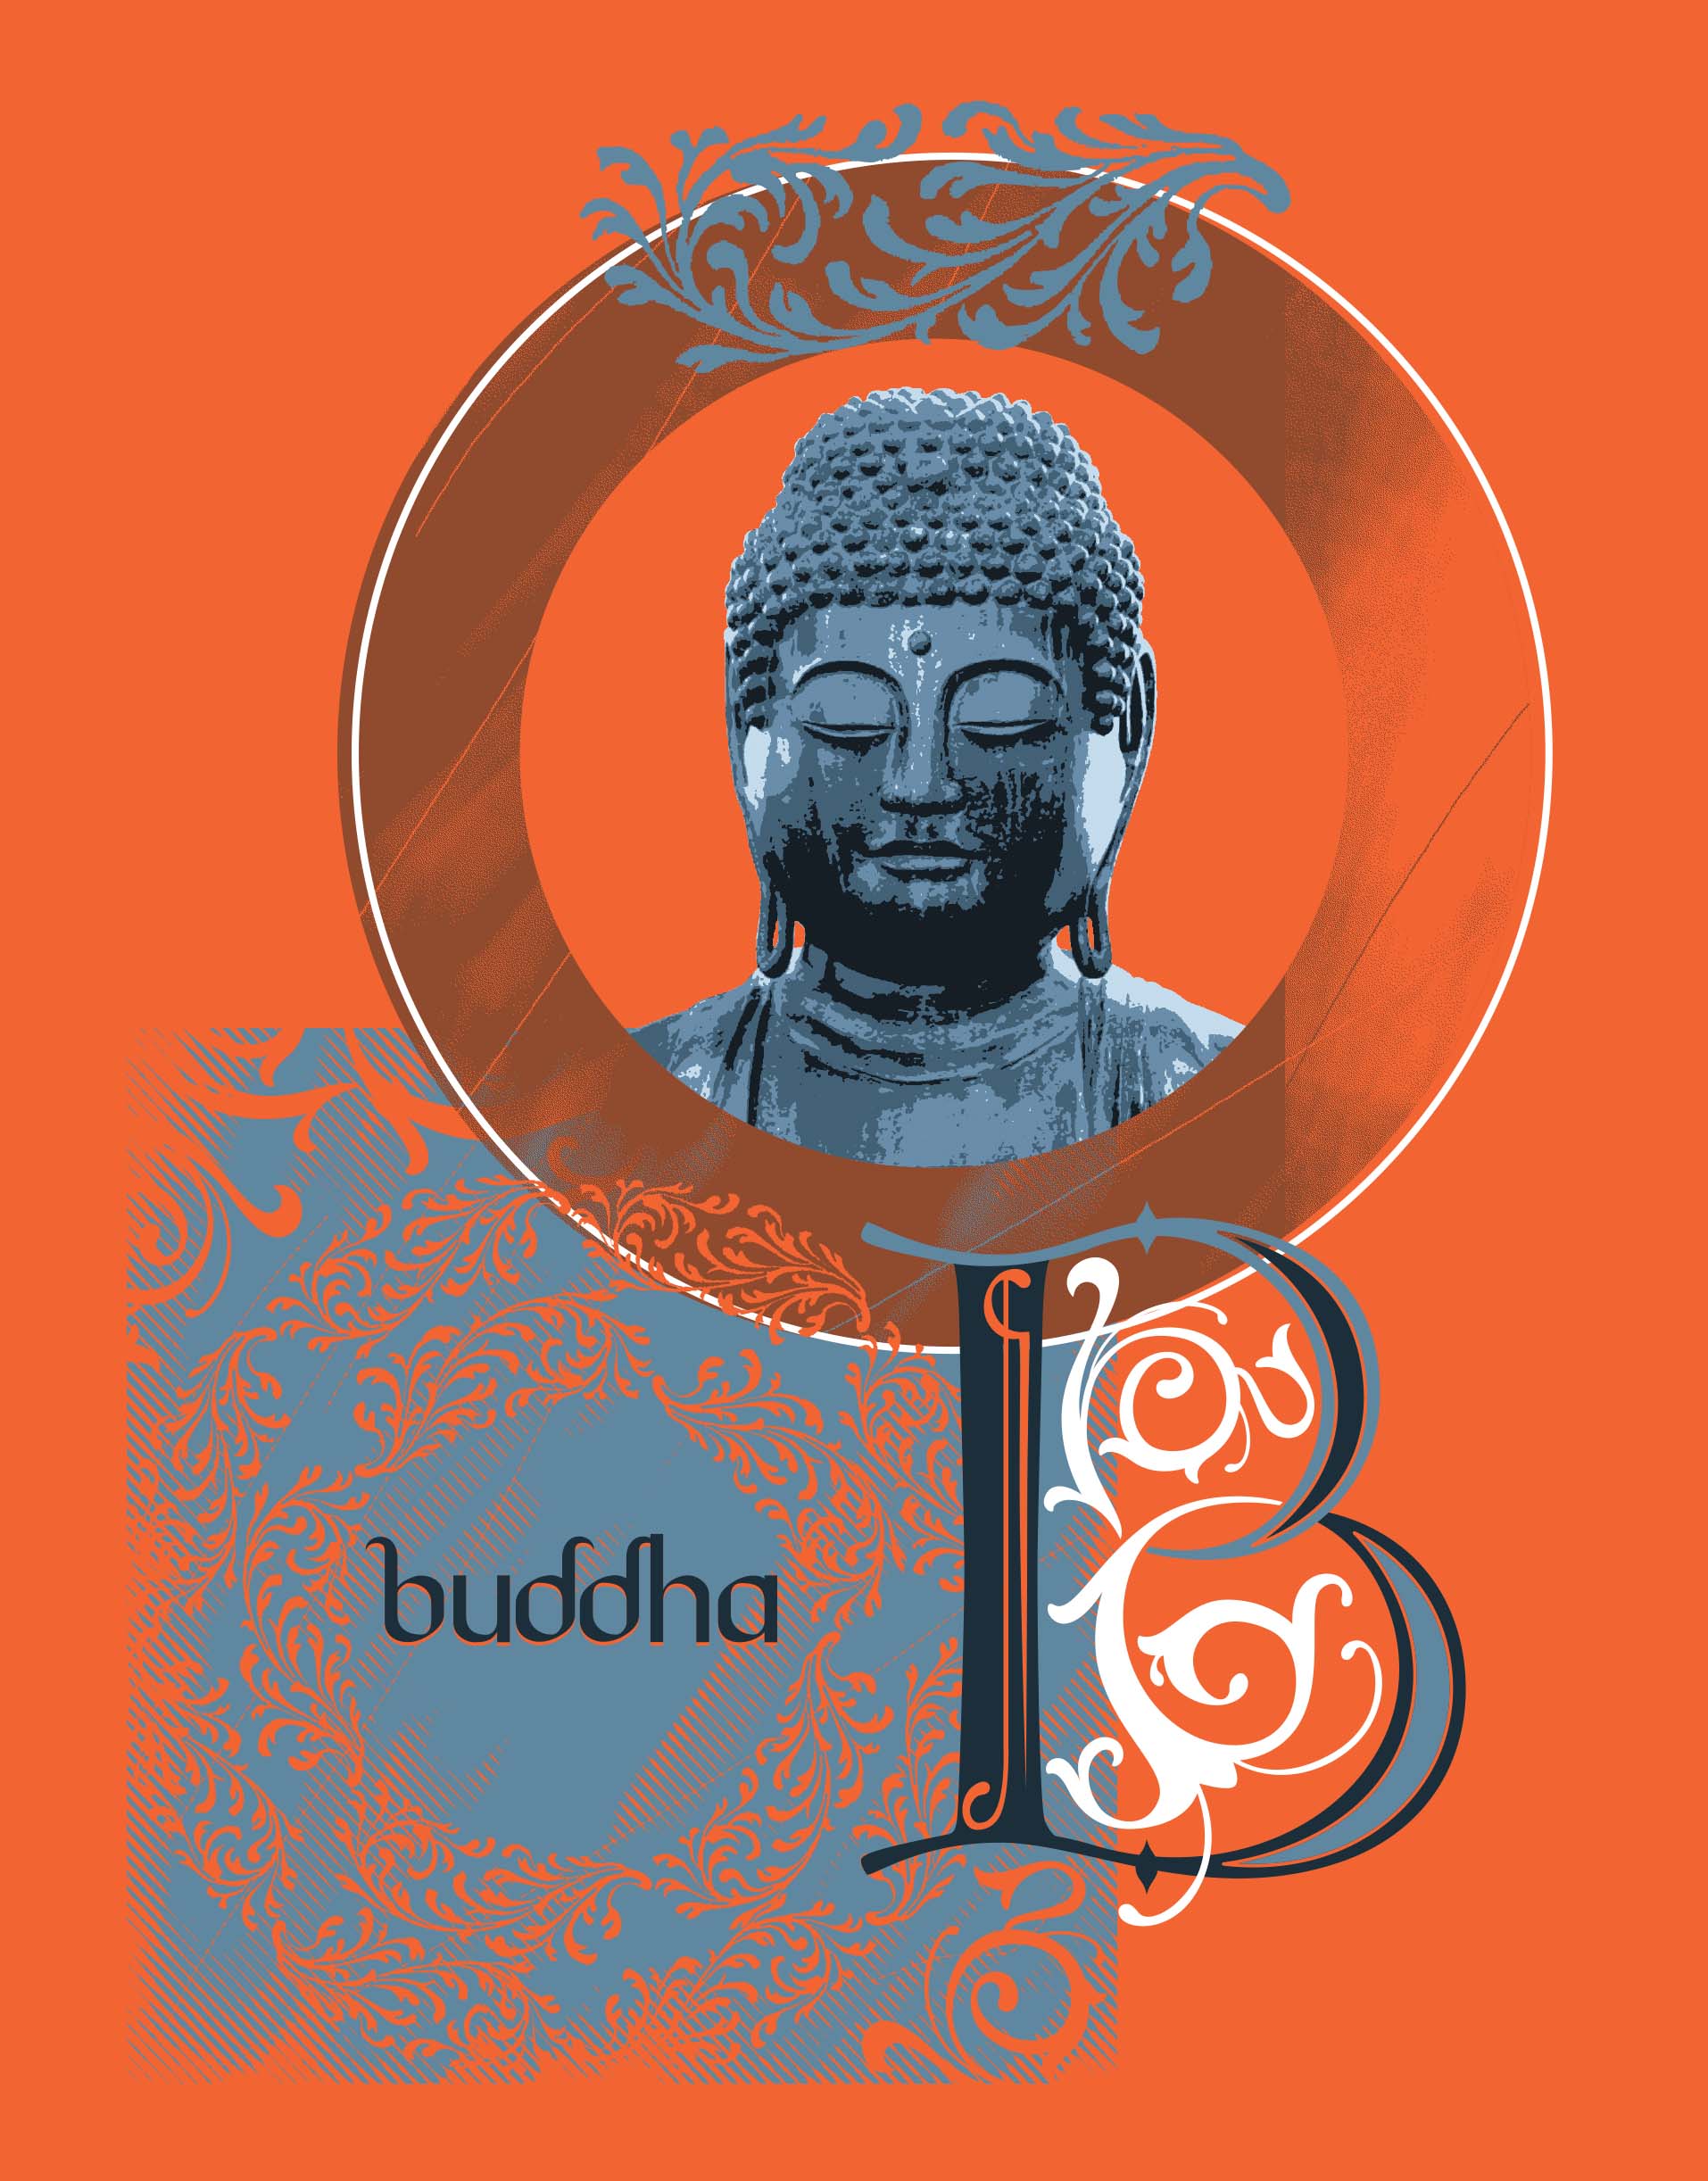 Buddaha Graphic with Lettering